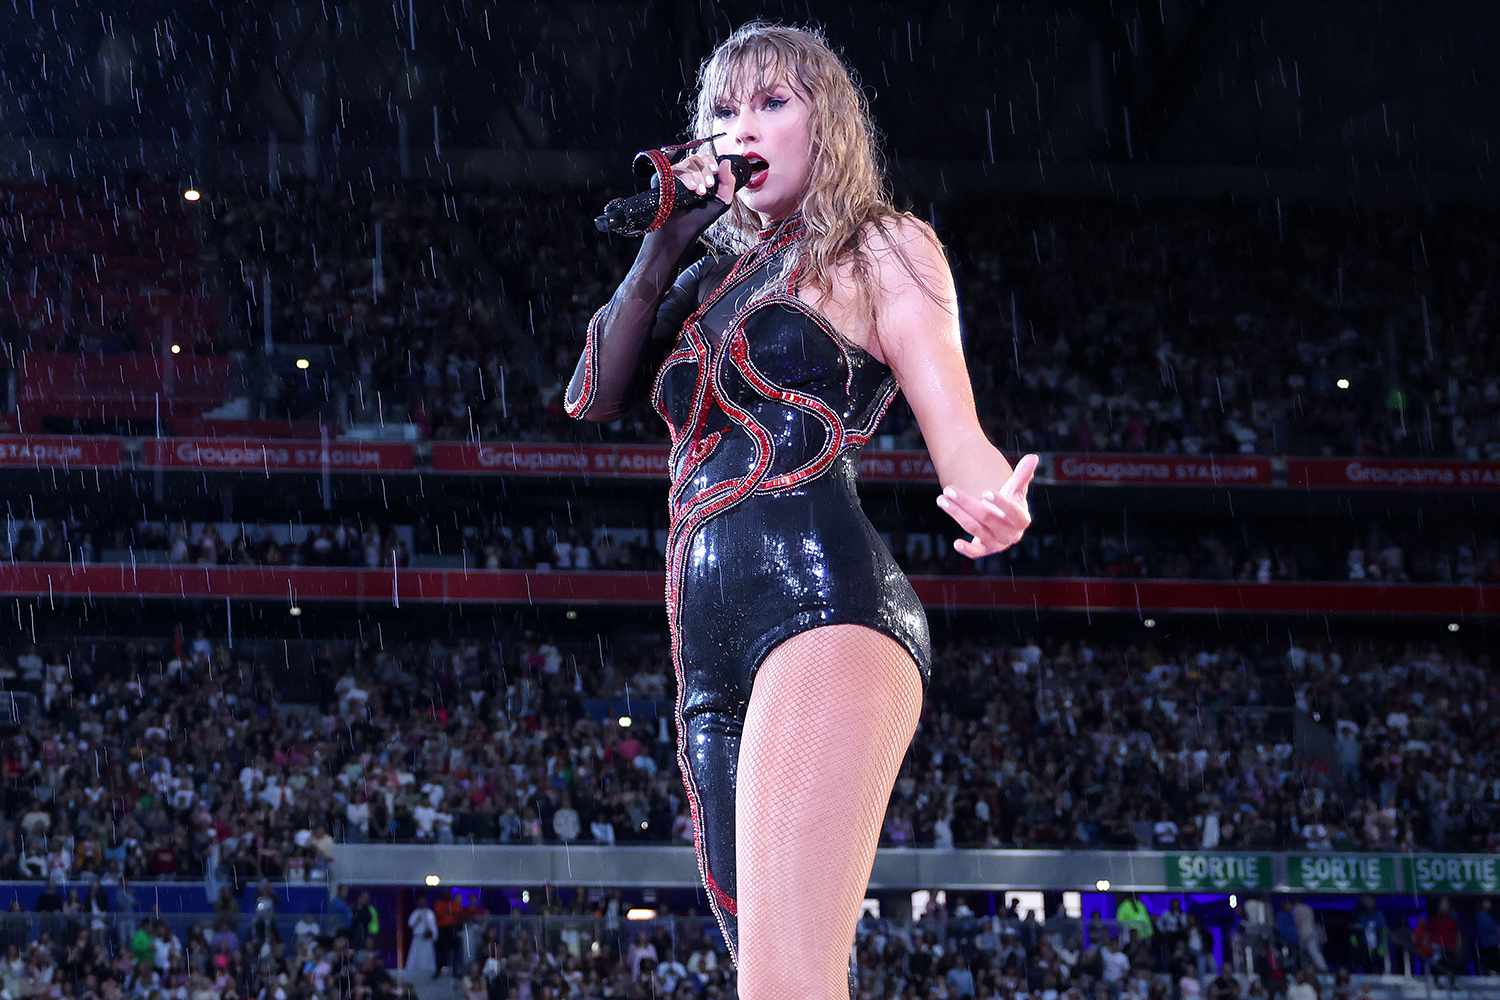 Taylor Swift Calls Fans ‘Champions and Heroes’ for ‘Wildly’ Dancing in the Rain at French Show